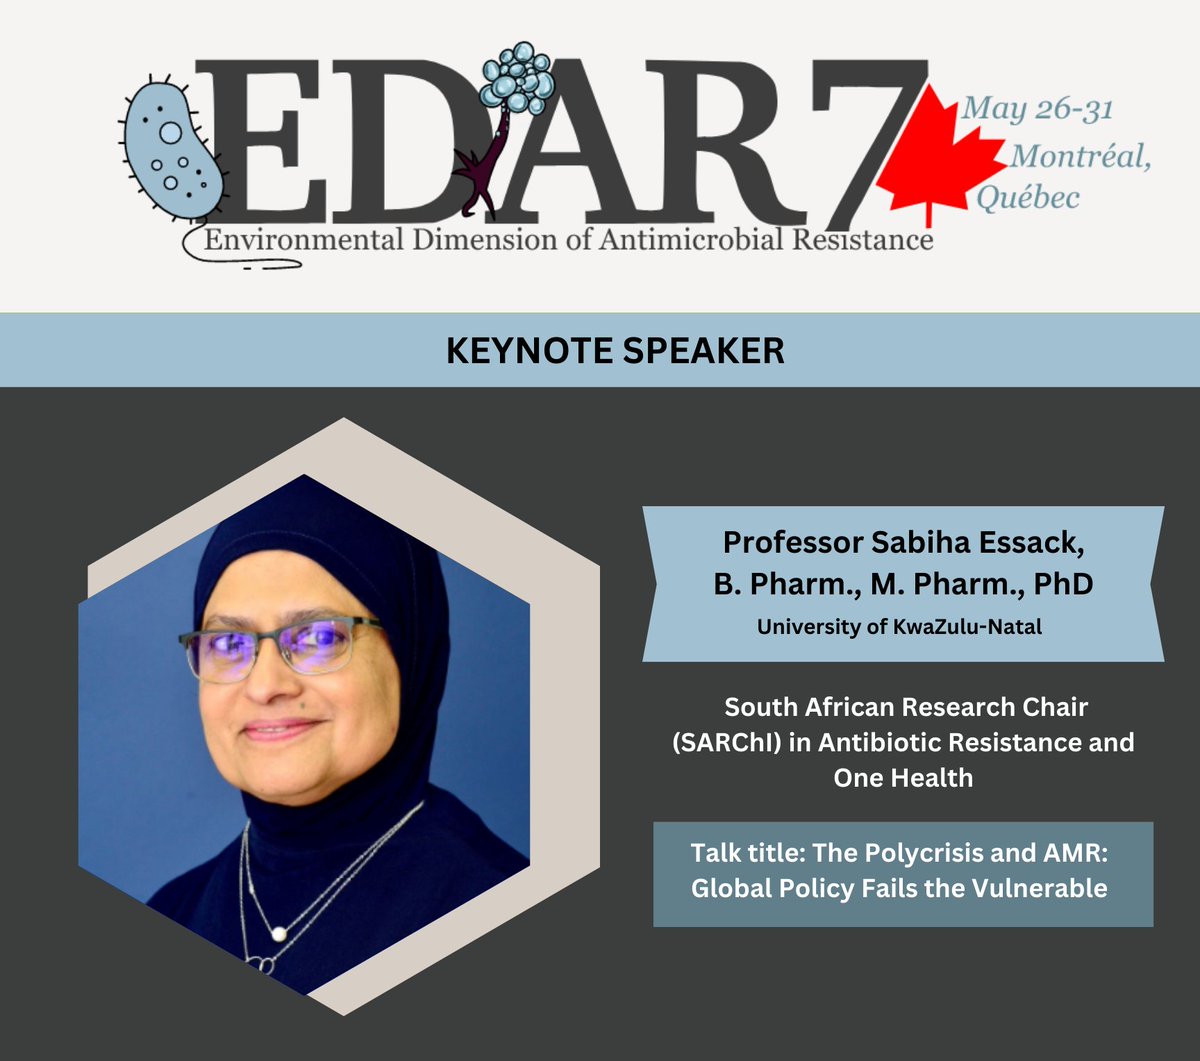 #EDAR7 will feature not just one, but two distinguished keynote speakers, and we are thrilled to announce Professor Sabiha Essack (@EssackSabiha) as one of them. Join us to hear her insightful talk titled, “The Polycrisis and AMR: Global Policy Fails the Vulnerable”.